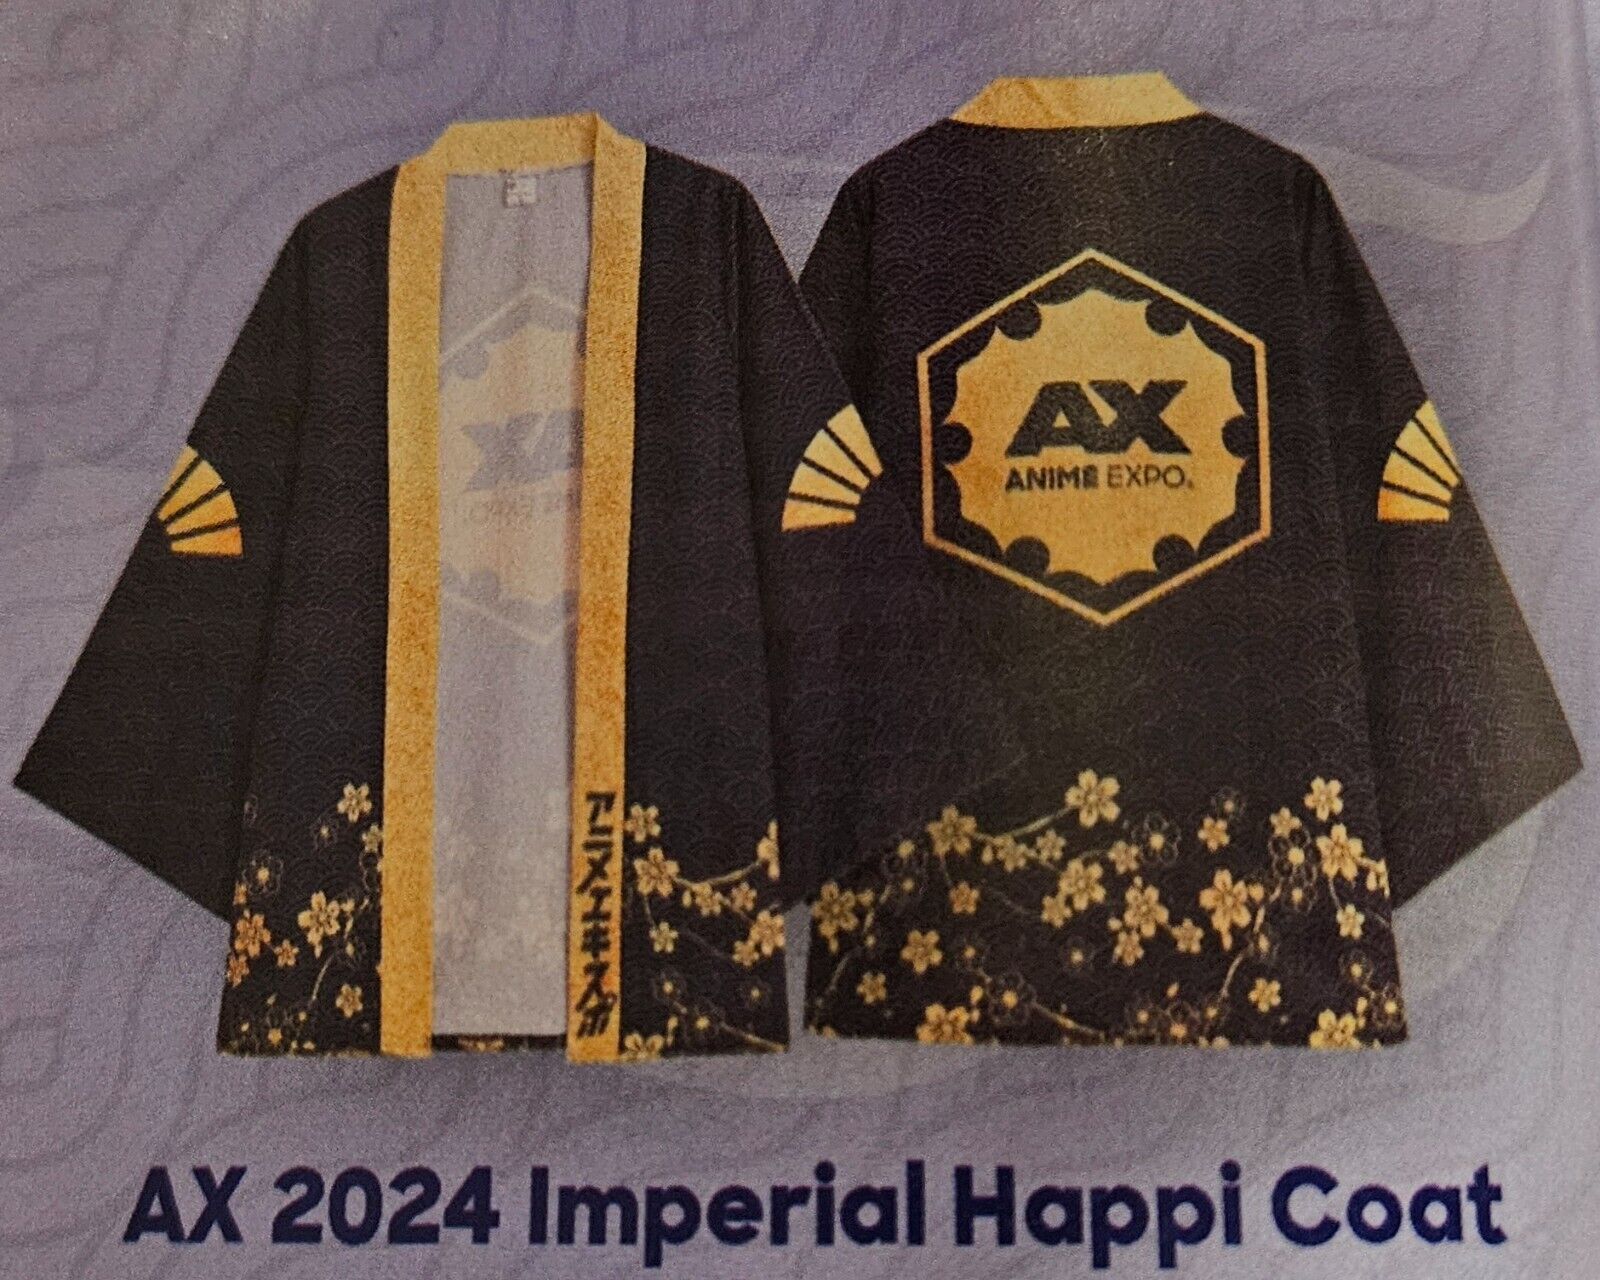 OFFICIAL 2024 SPJA Anime Expo Imperial Happi Coat size XL SOLD OUT- RARE  